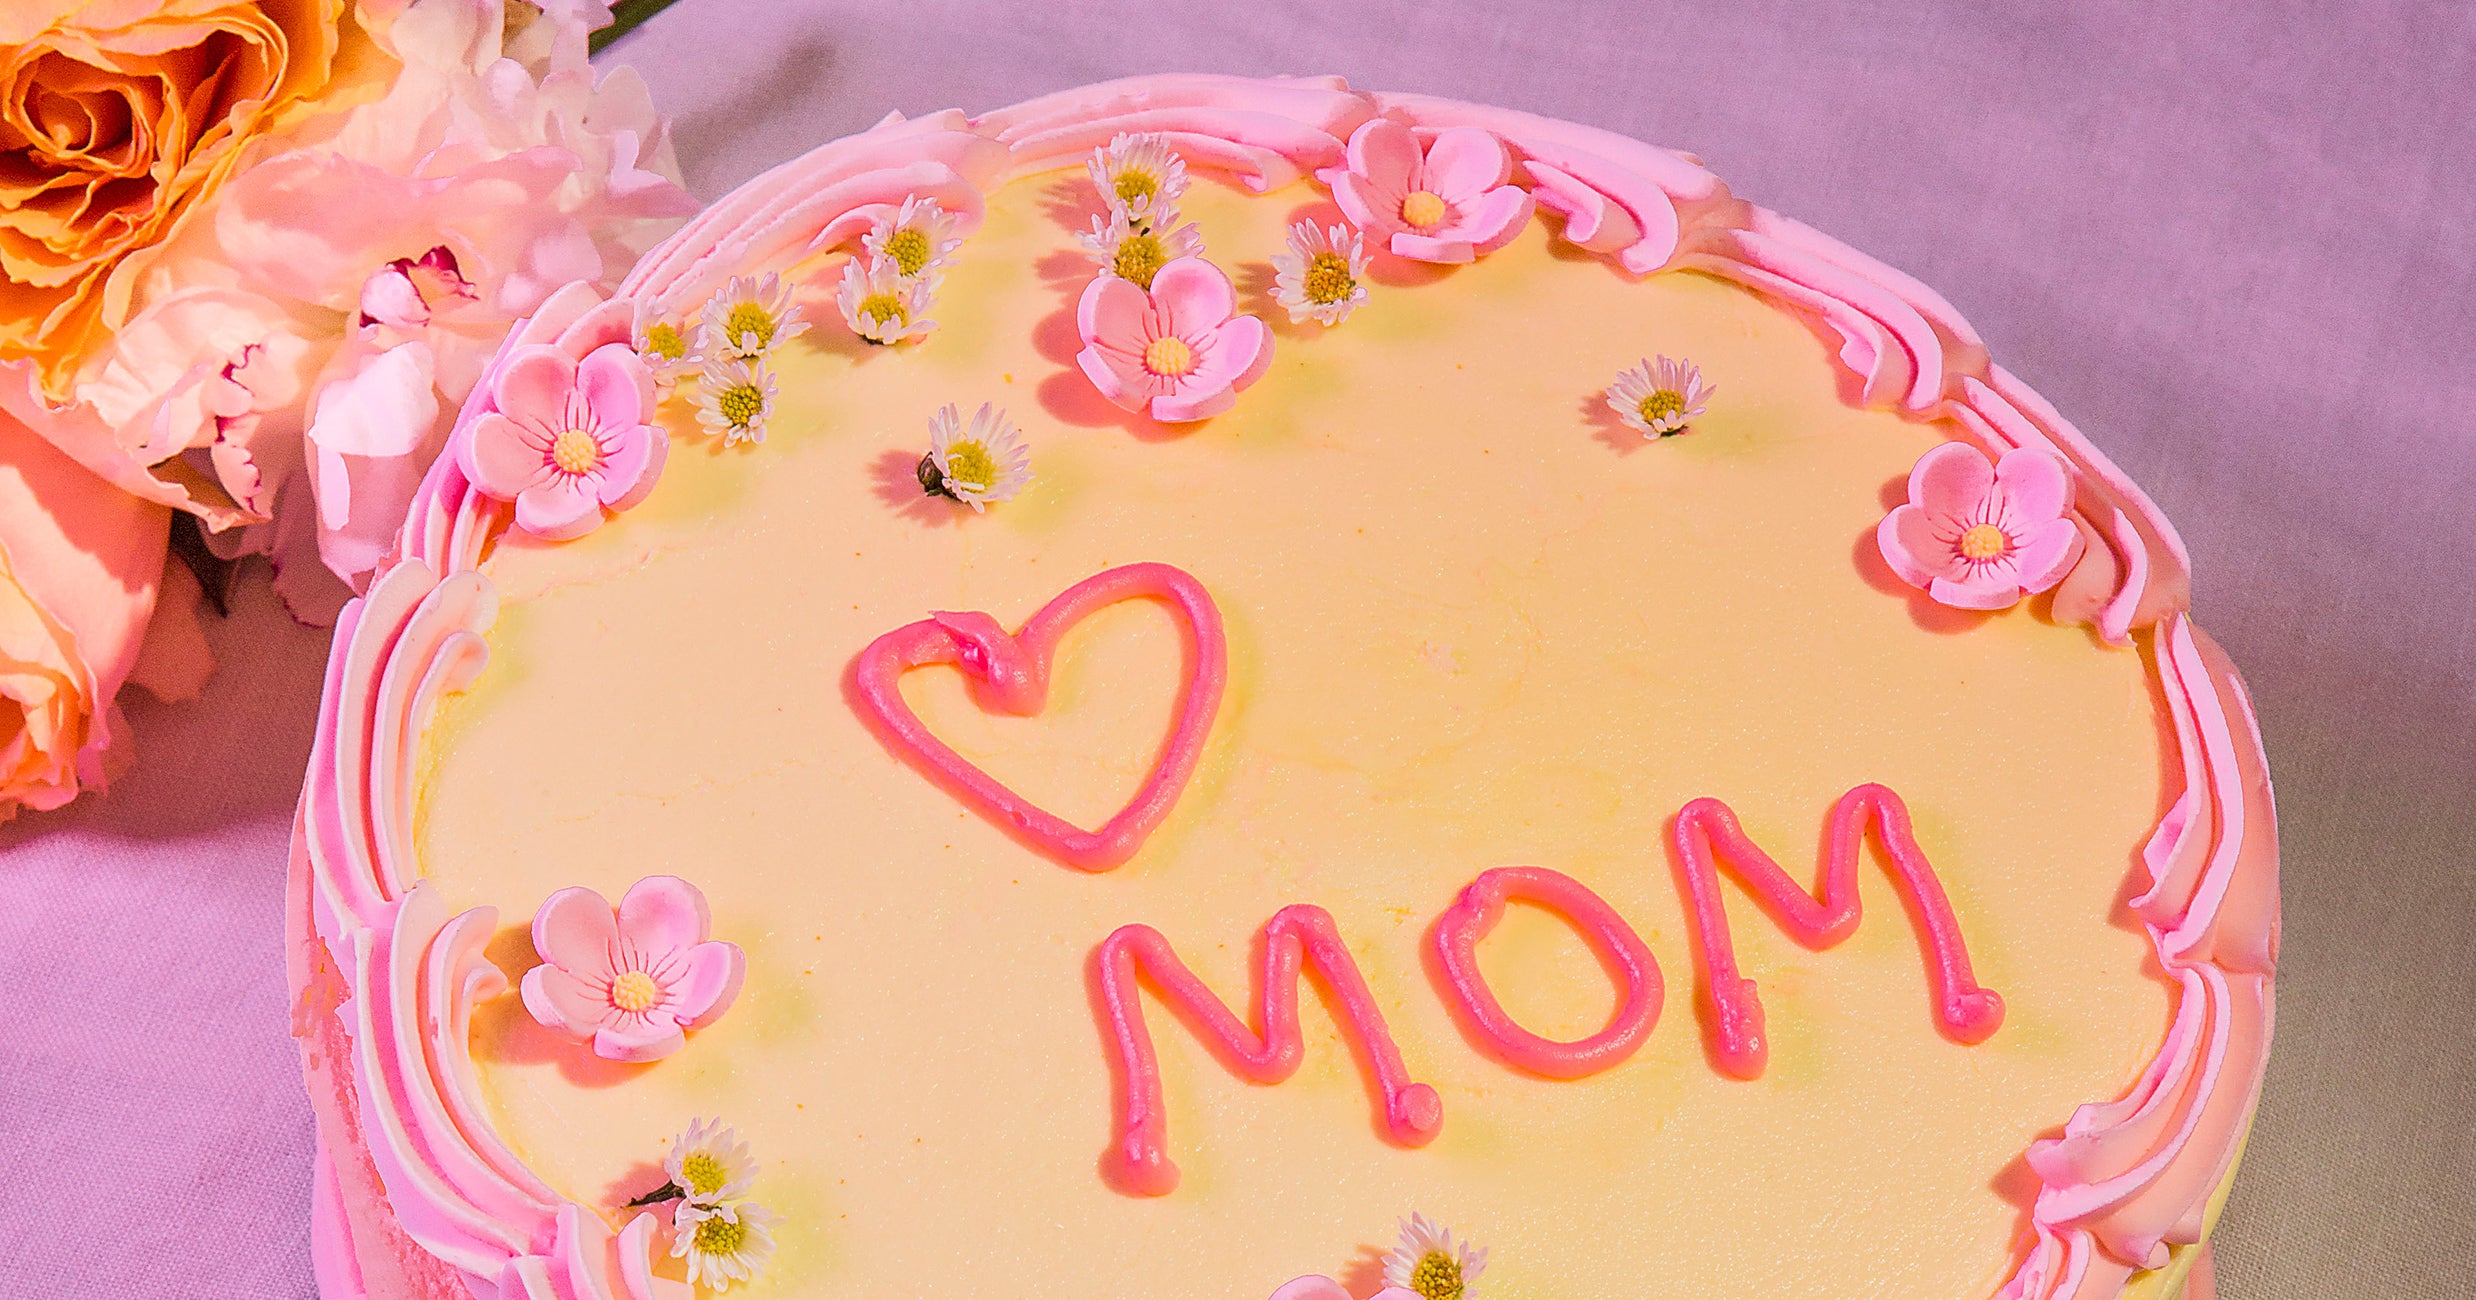 How To Celebrate Mother's Day Online